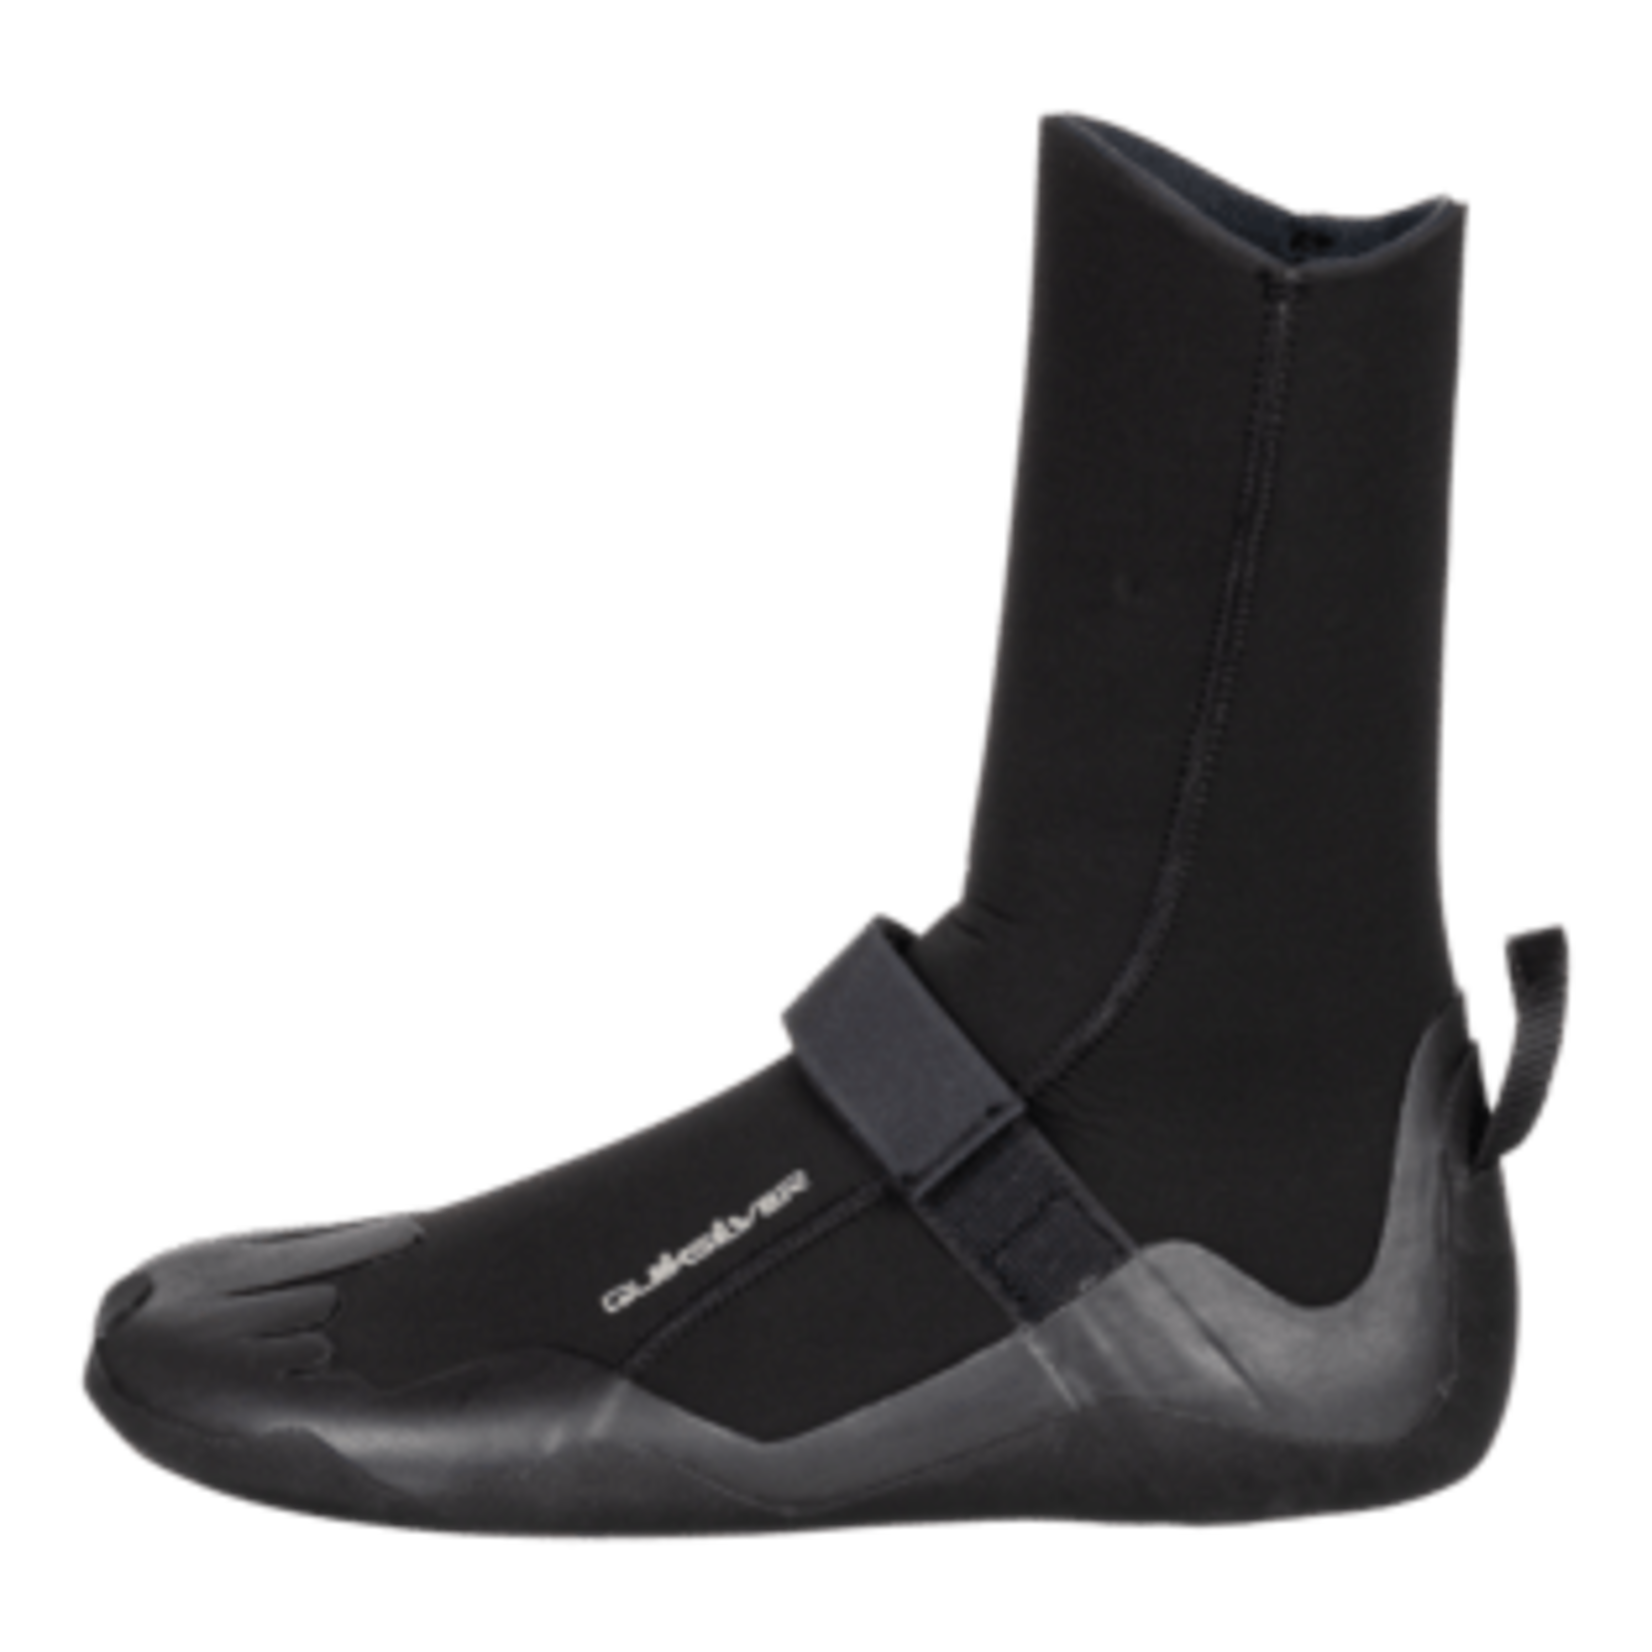 Quiksilver Sessions 5mm round toe boot